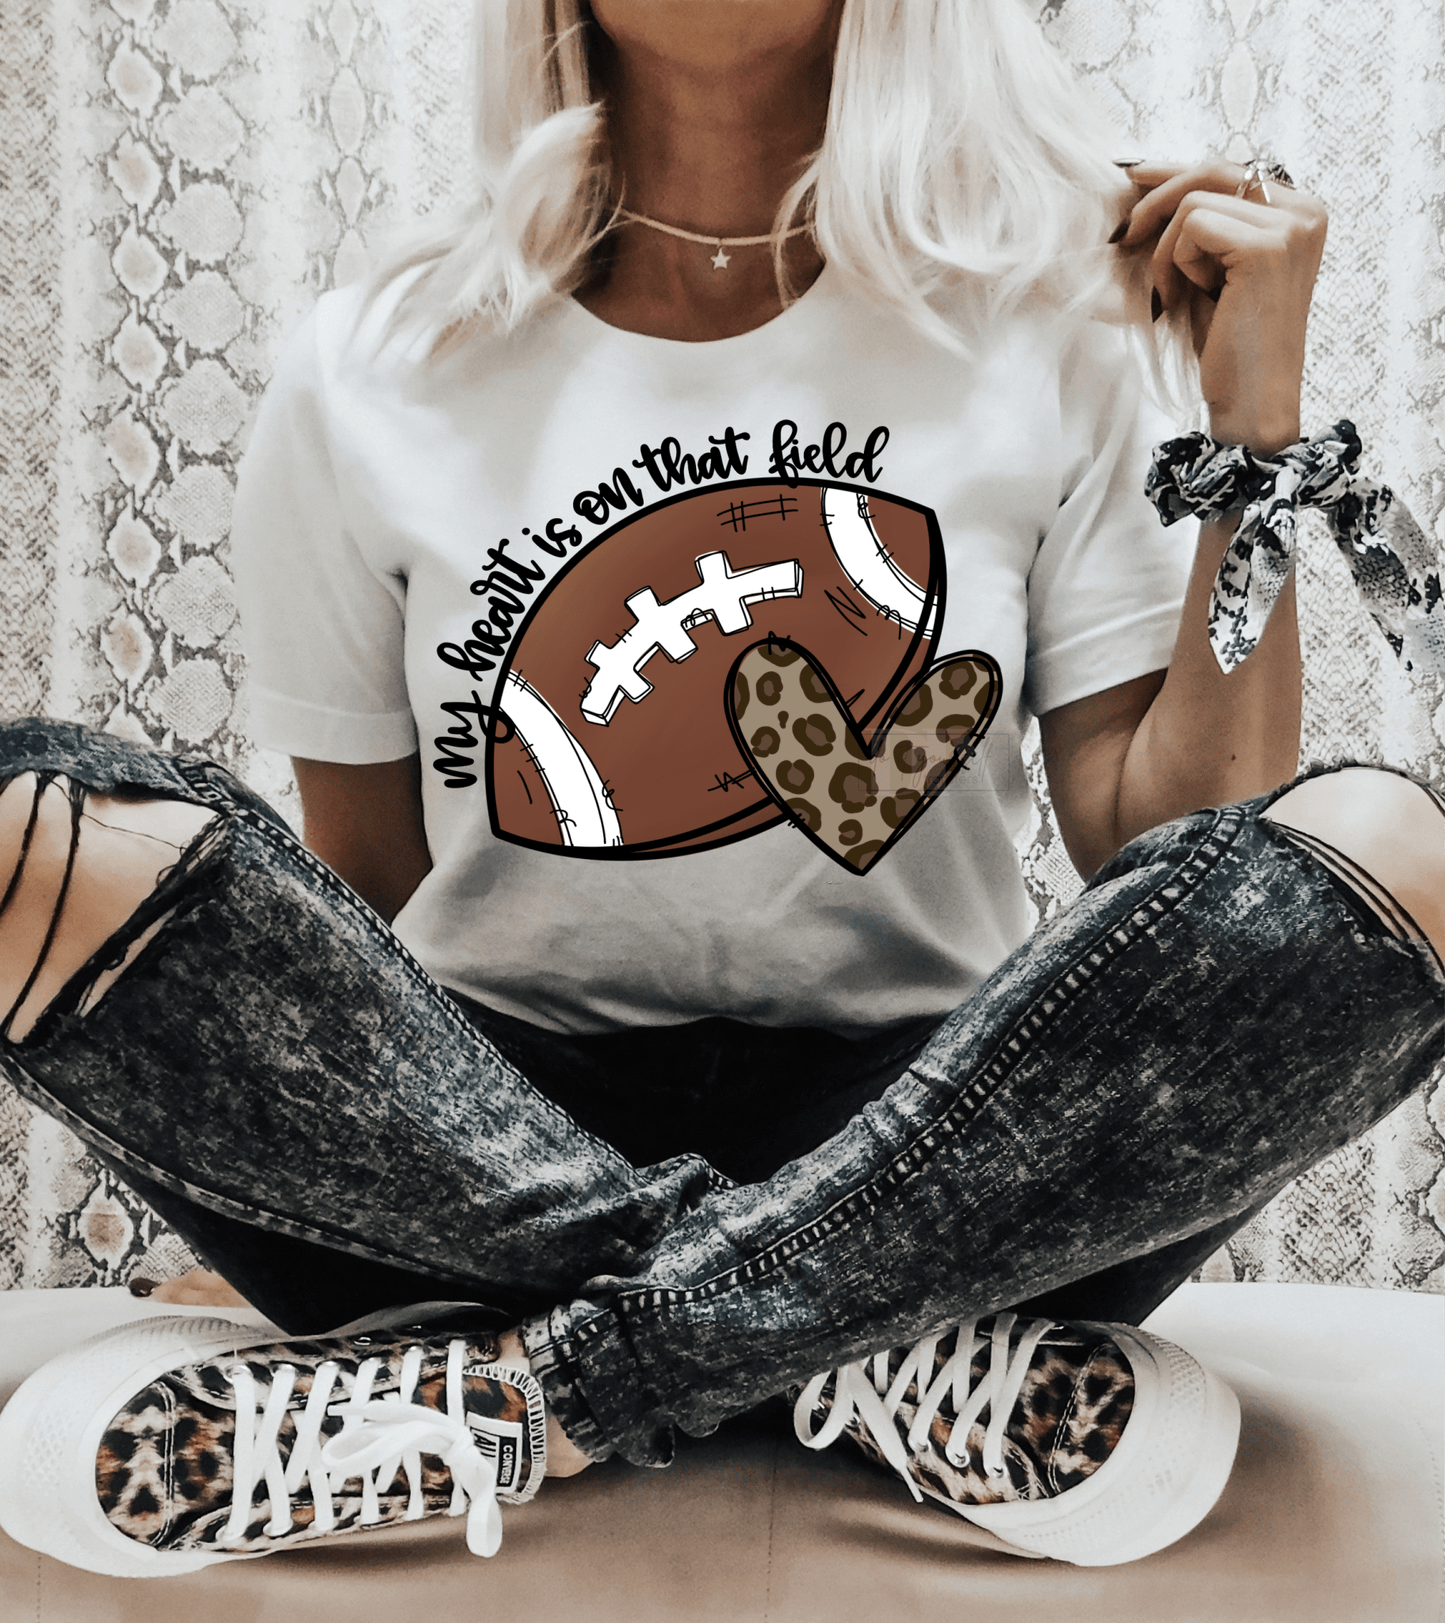 My Heart is on that field FOOTBALL leopard size ADULT 10.5x12.5 DTF TRANSFERPRINT TO ORDER - Do it yourself Transfers